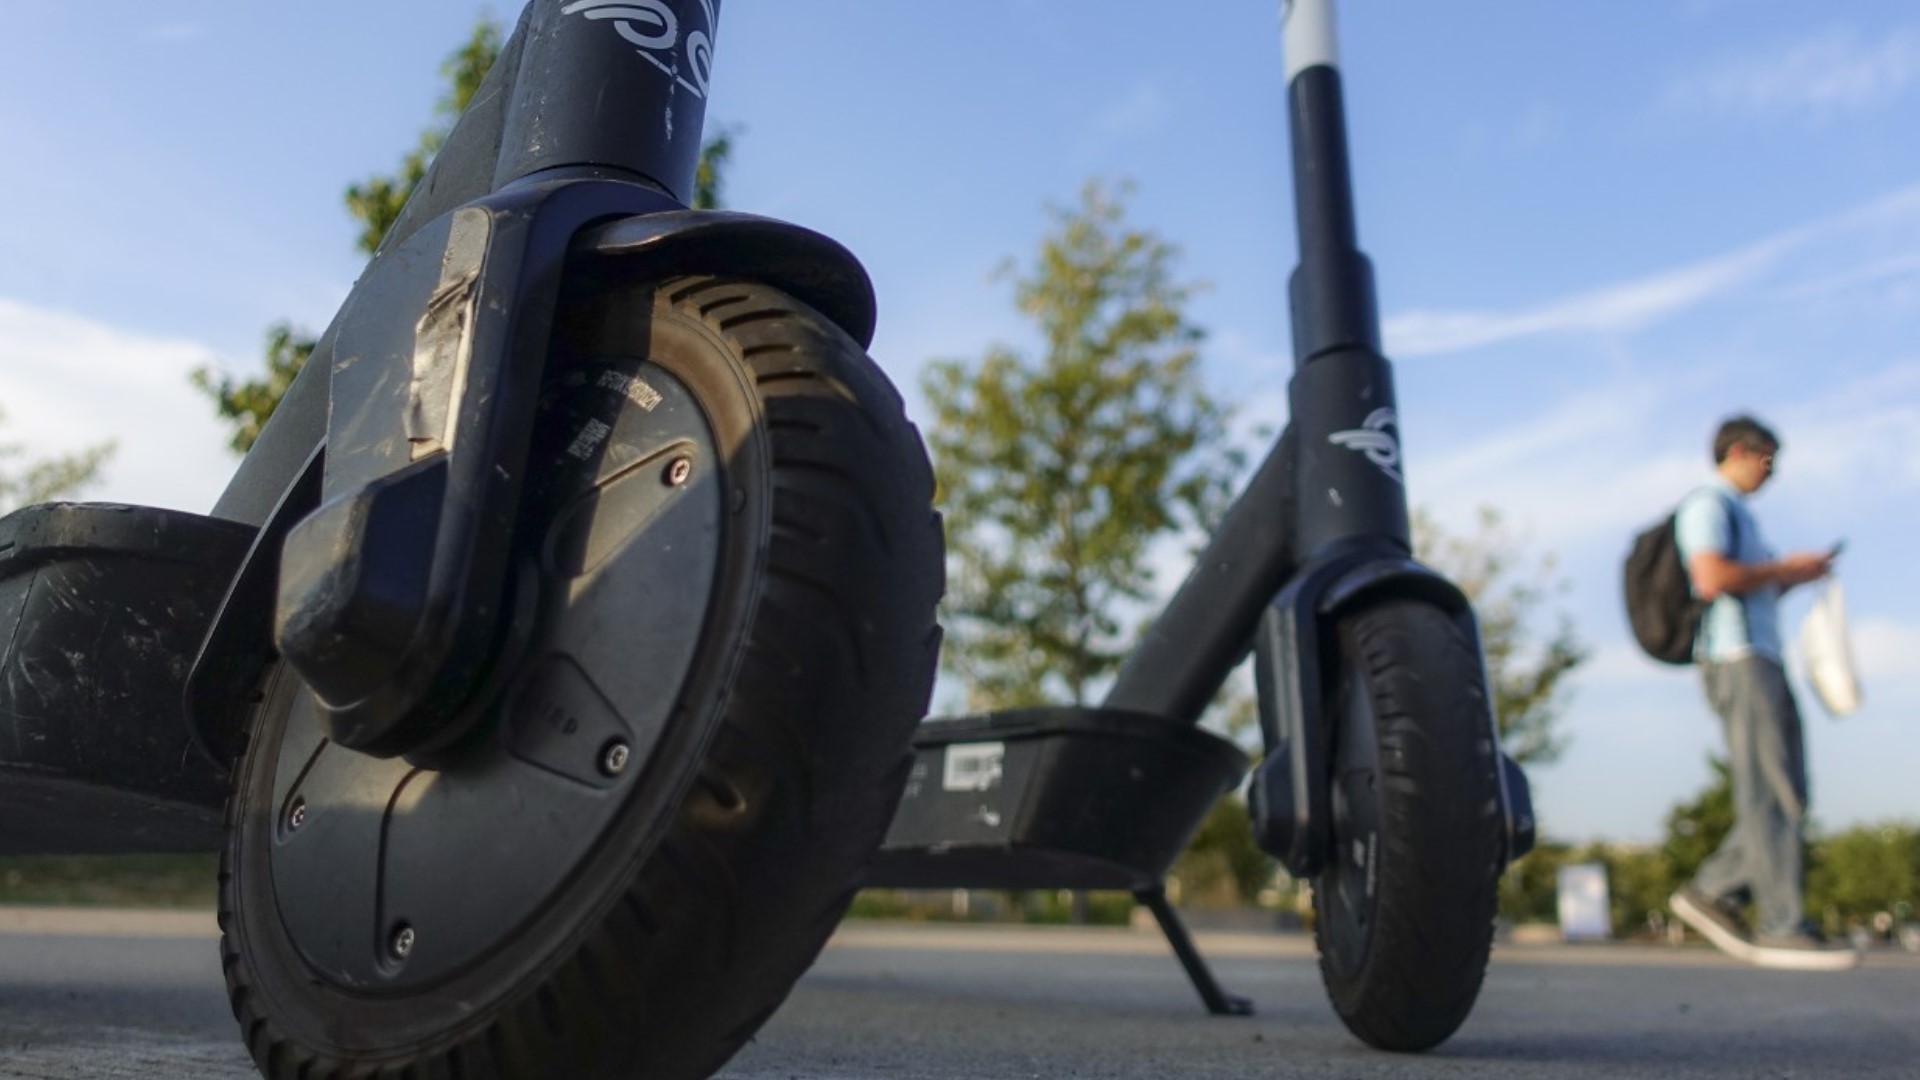 Only a portion of the city will be allowed to use the scooters in the first phase of the project.